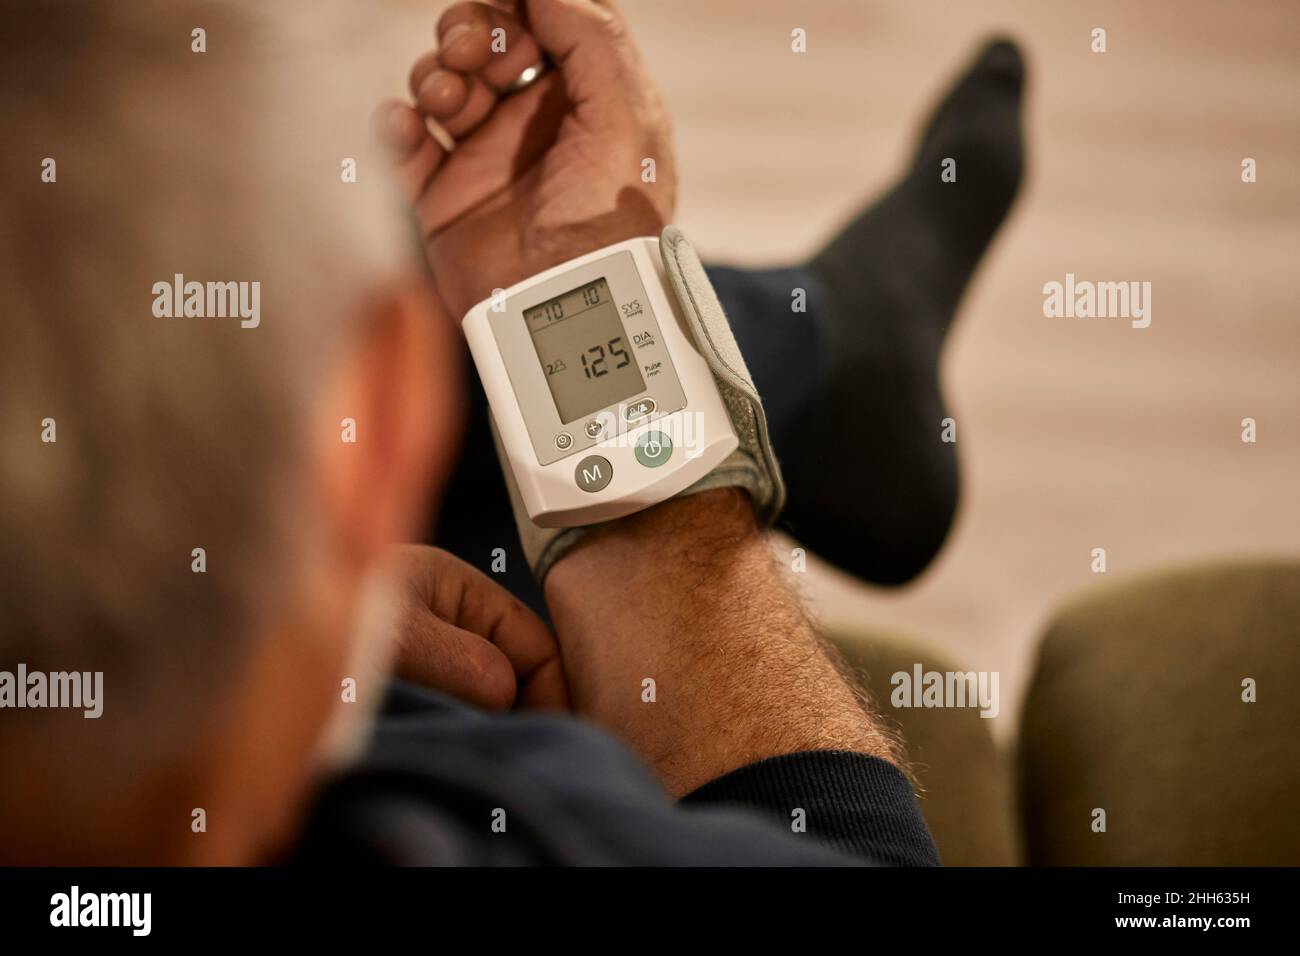 Man measuring blood pressure at home Stock Photo